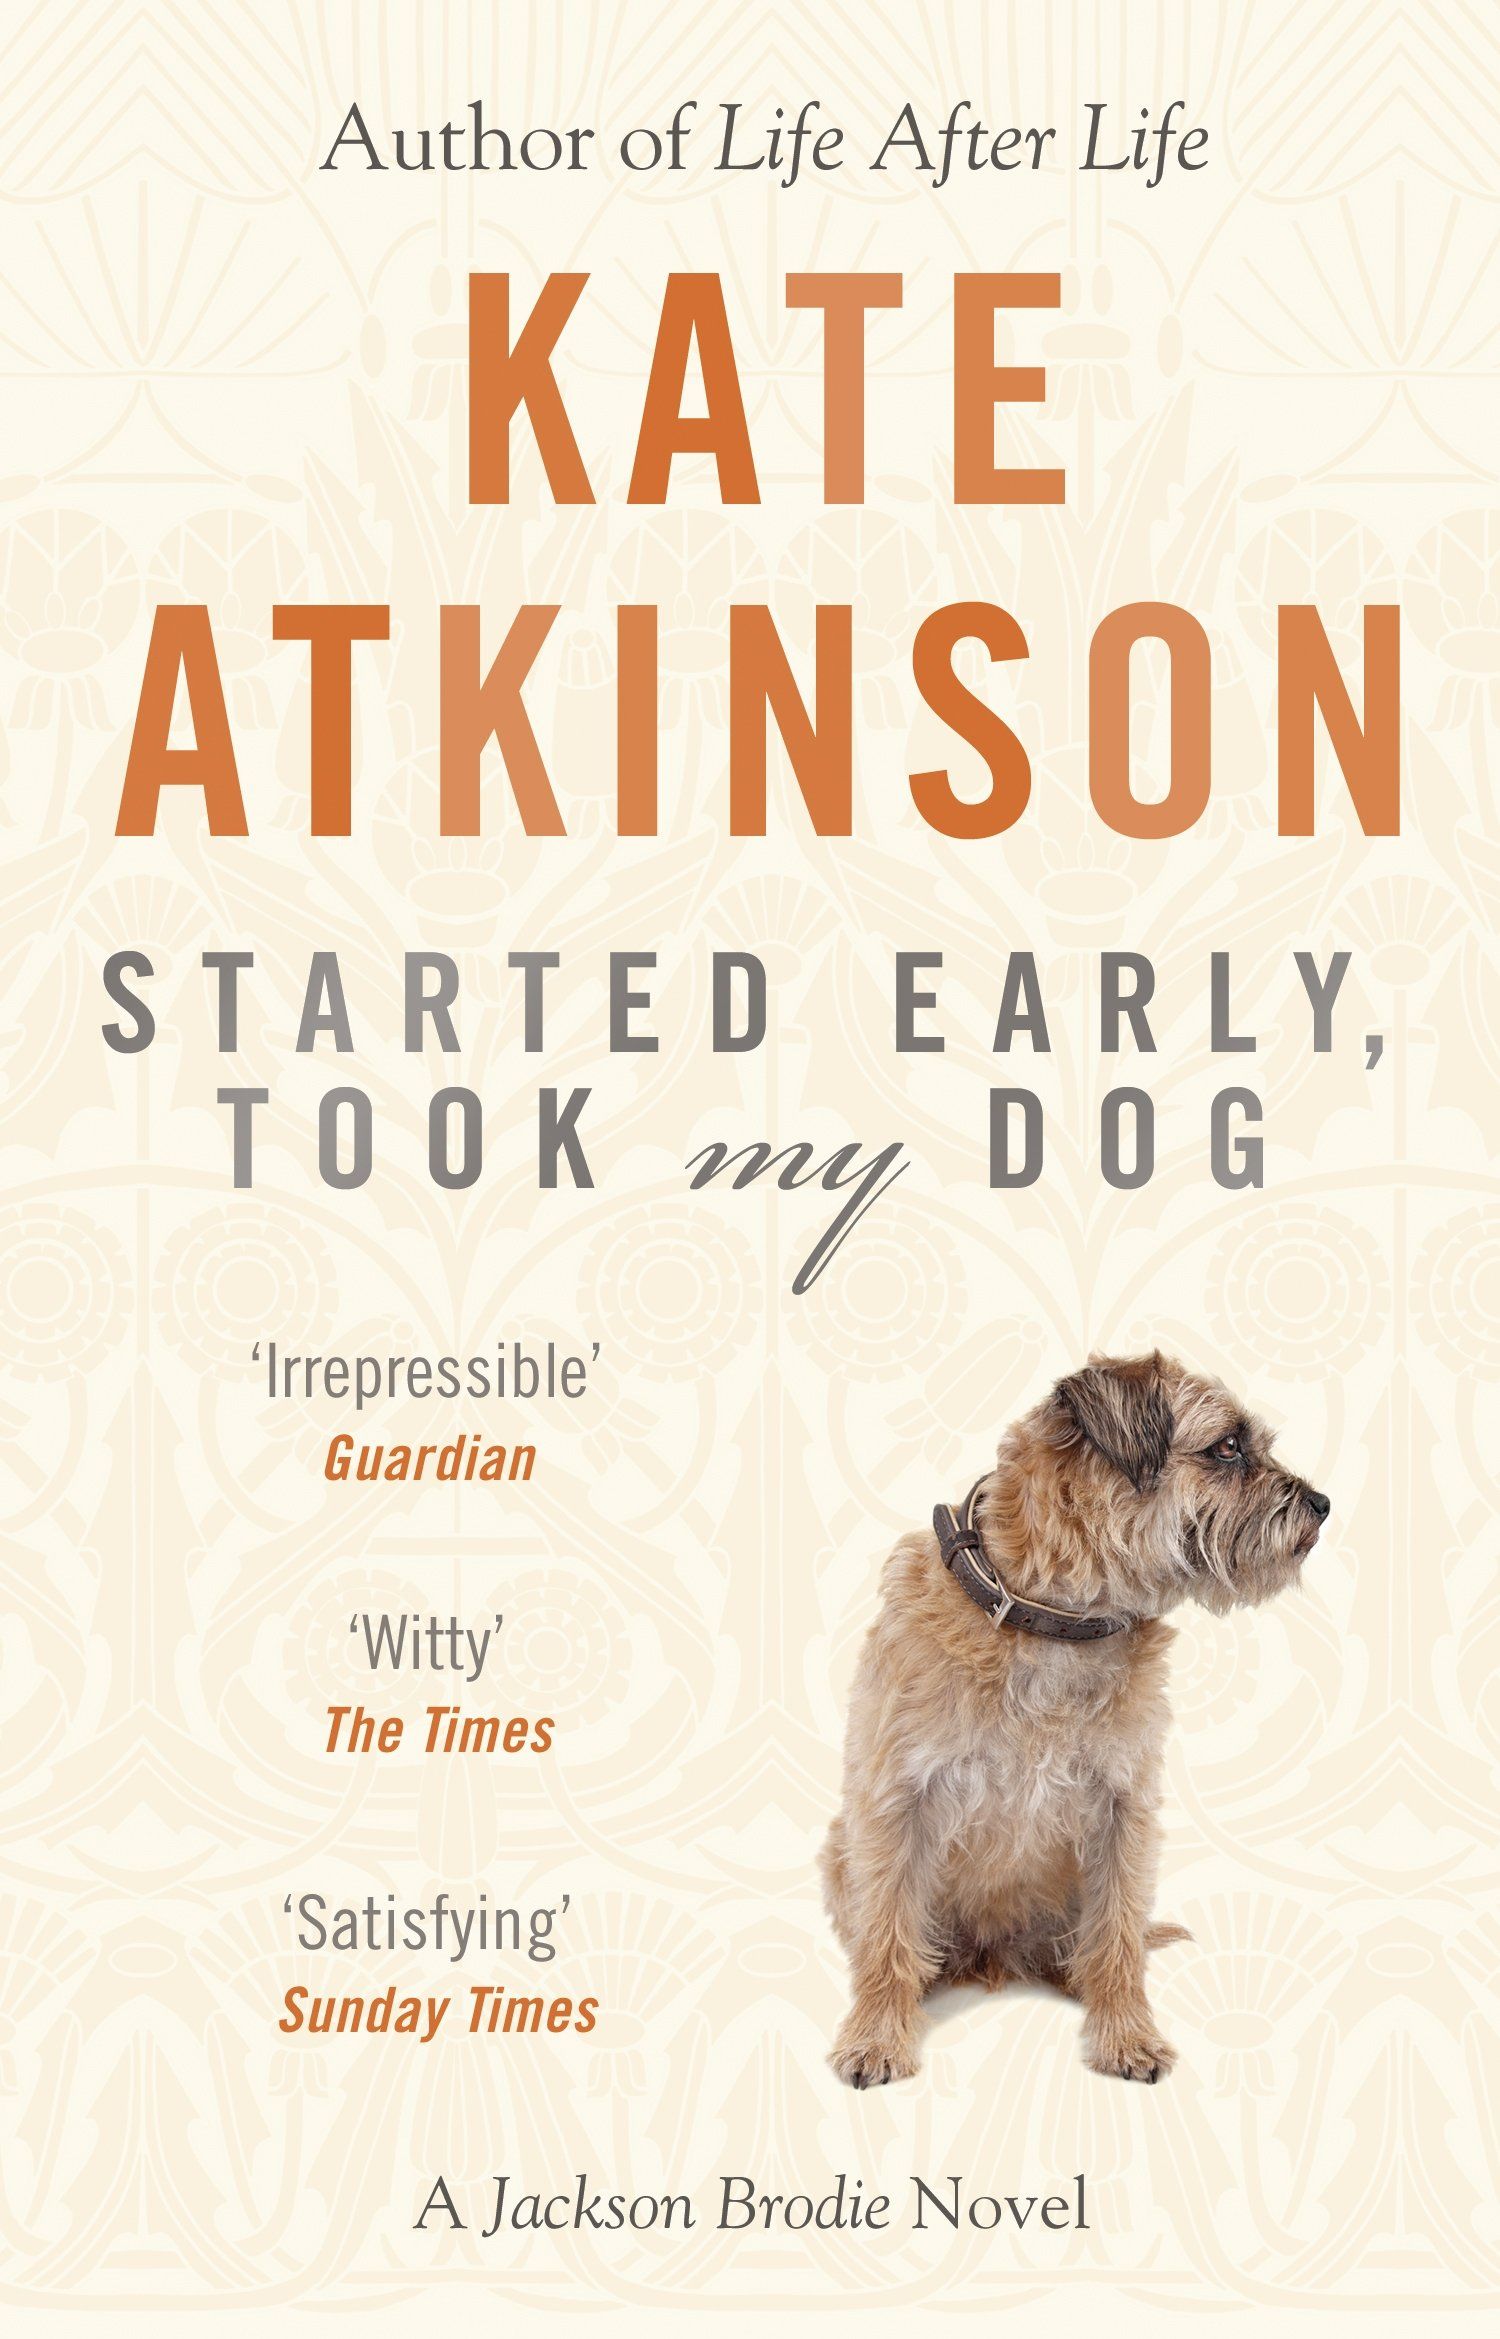 kate atkinson started early took my dog summary